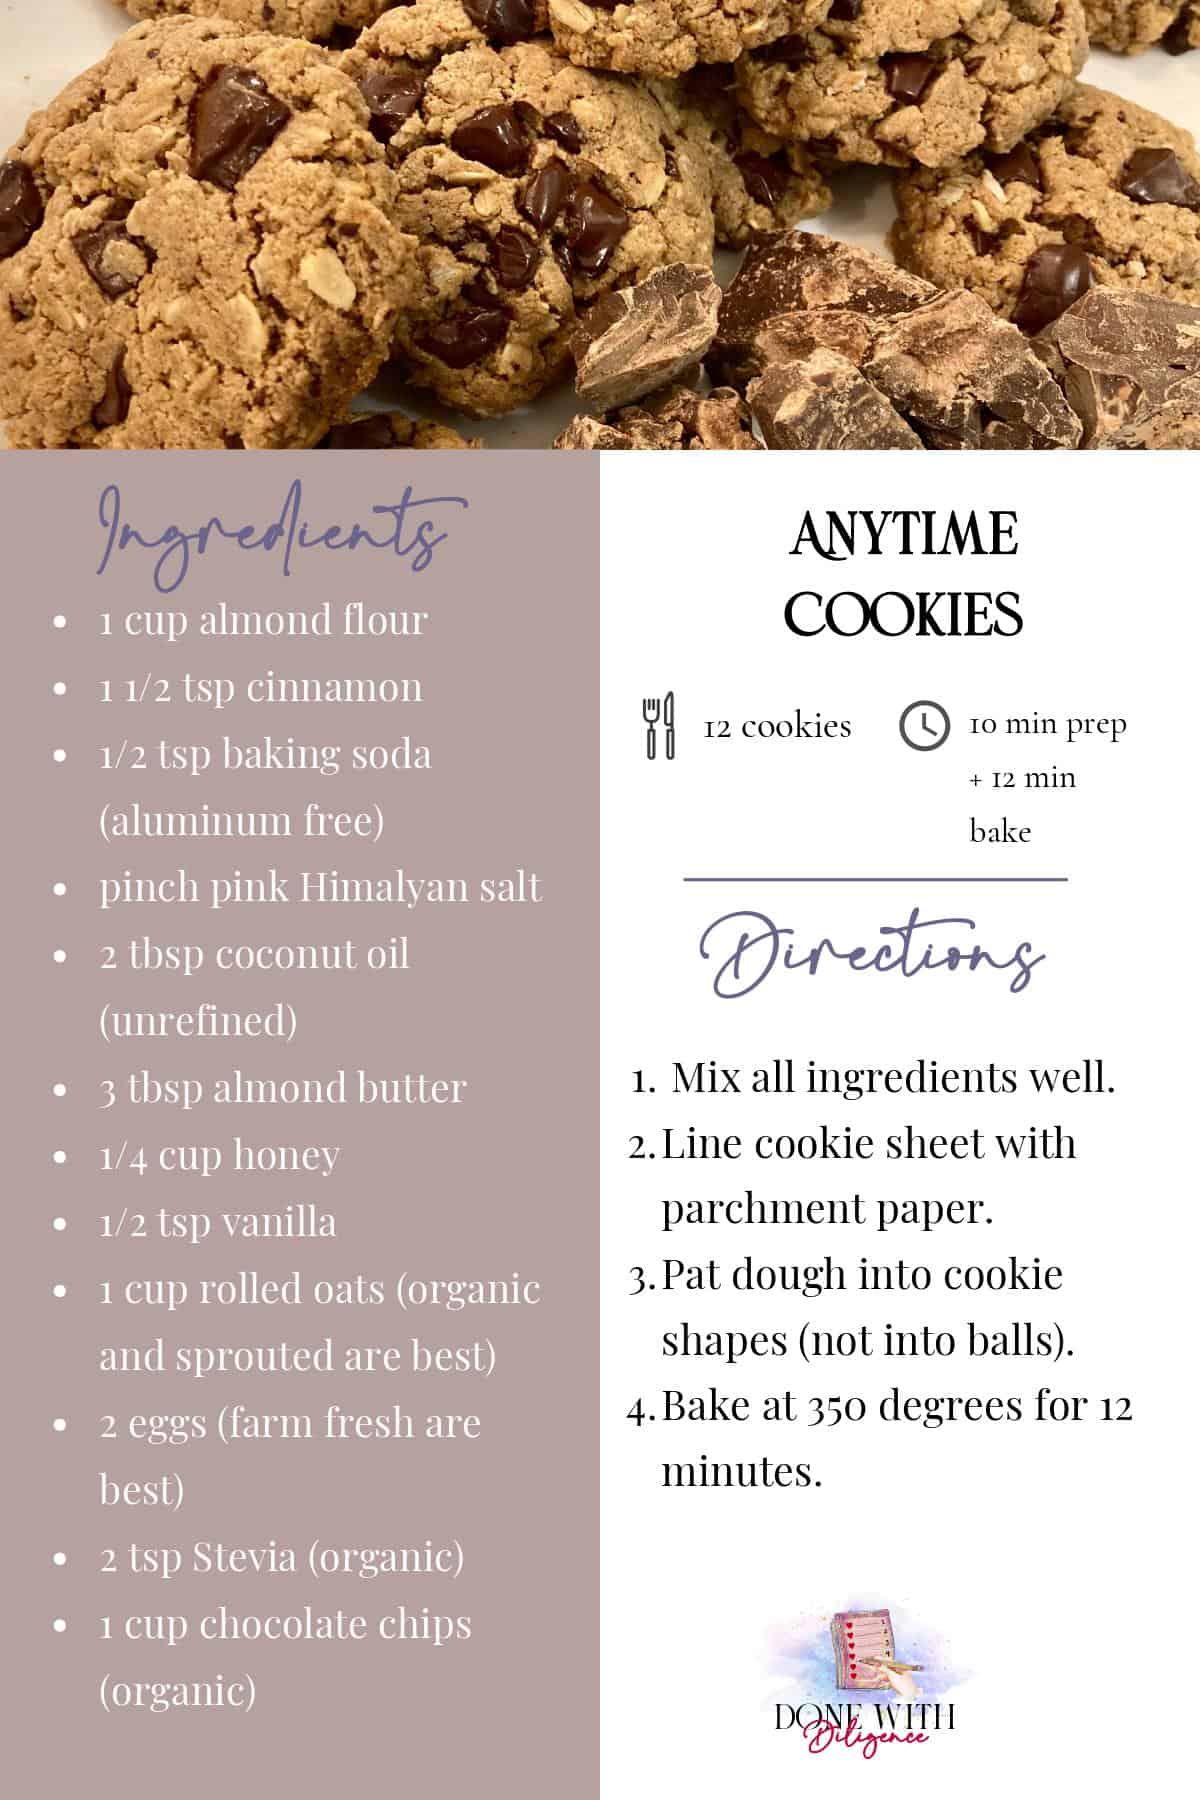 Recipe card for Anytime Cookies (Portrait)
